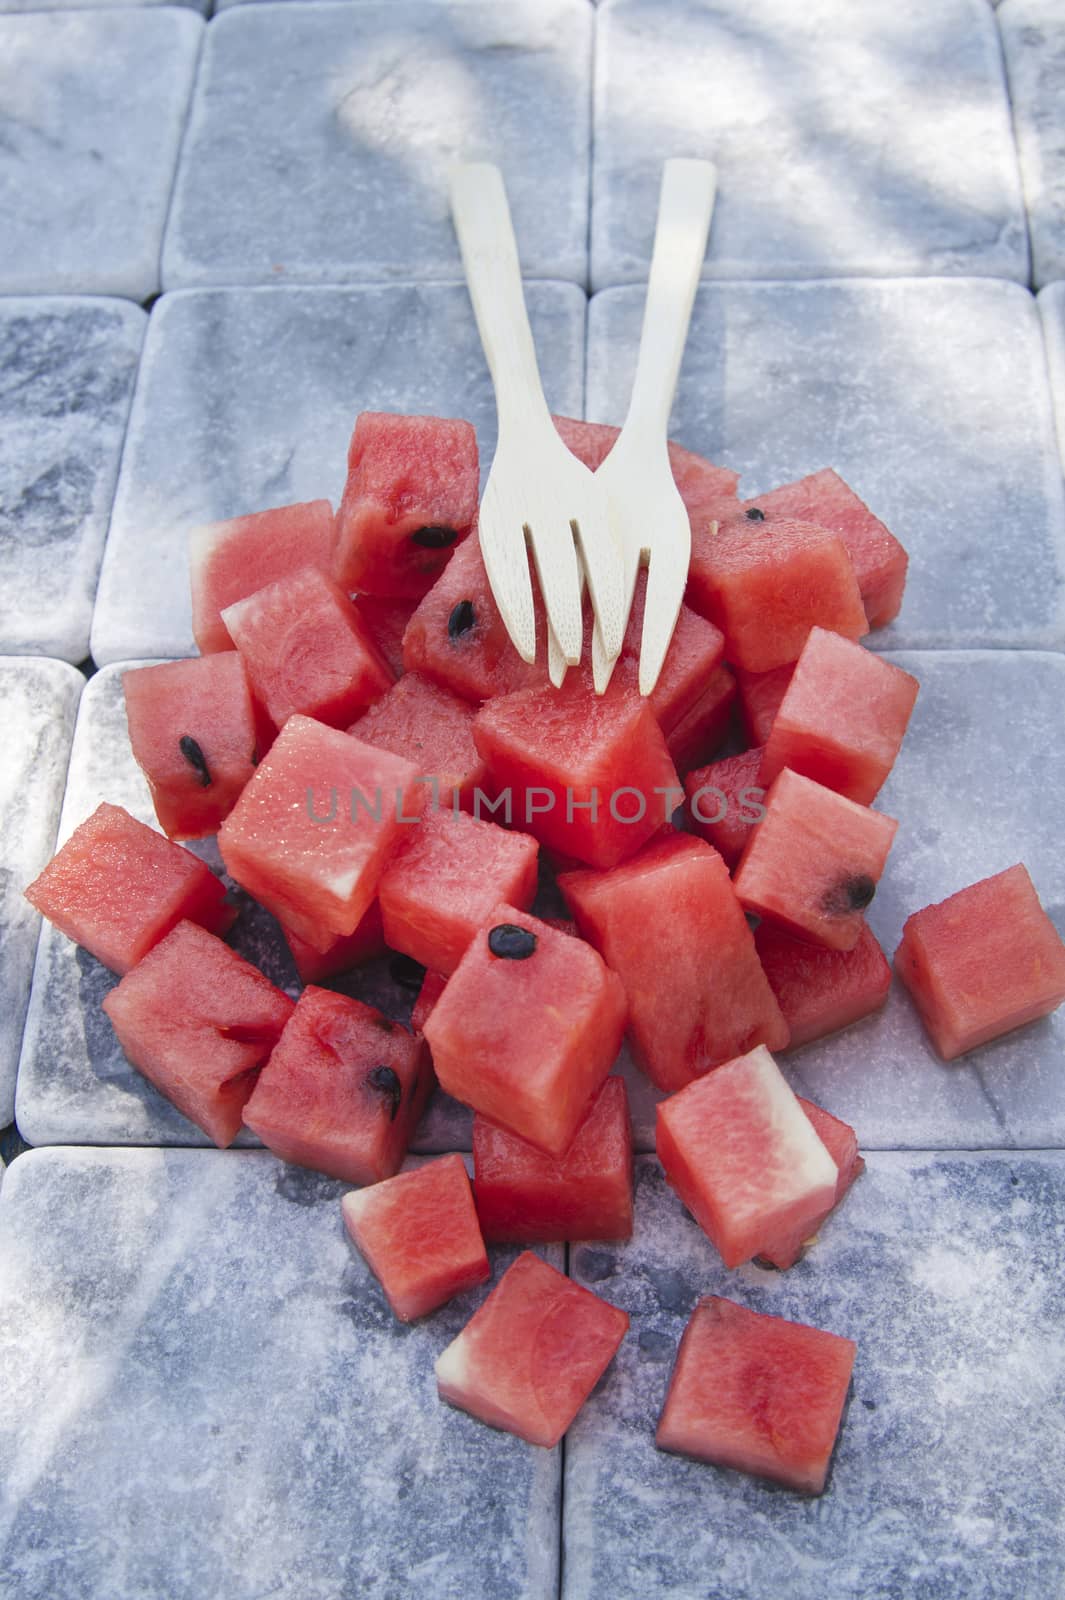 Presentation of a summer dish made of diced watermelon 